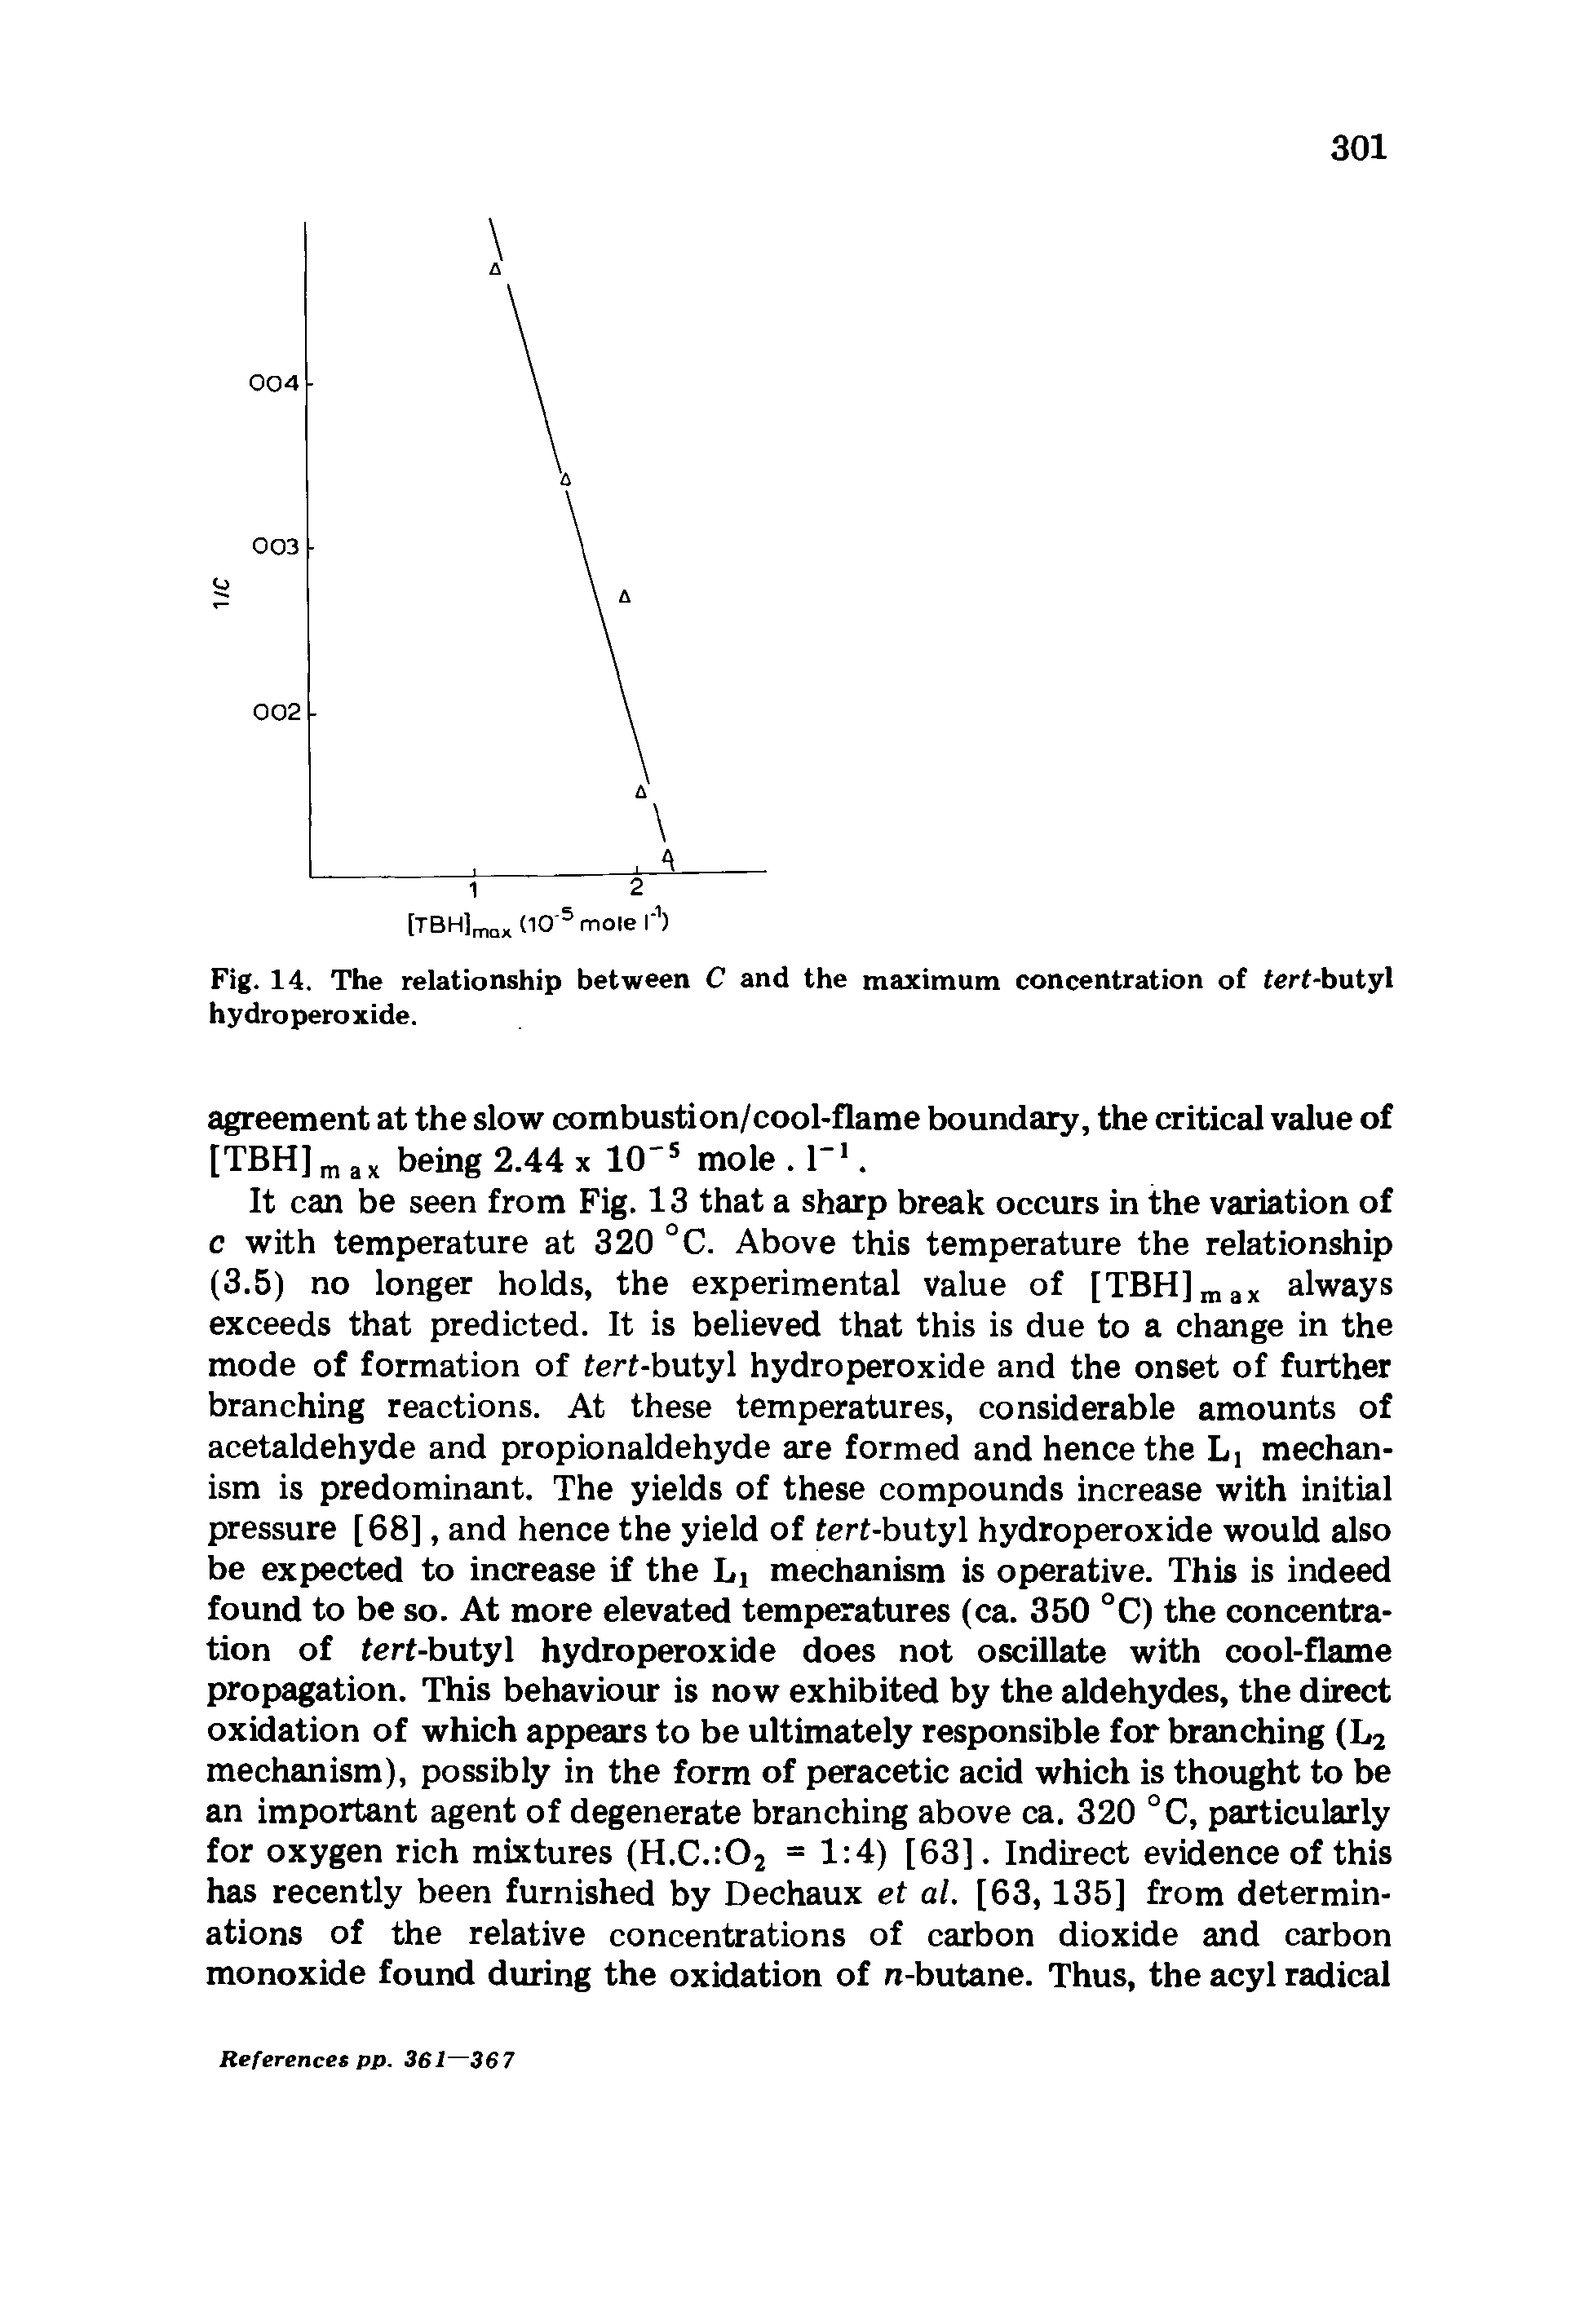 Fig. 14. The relationship between C and the maximum concentration of tcrt-butyl hydroperoxide.